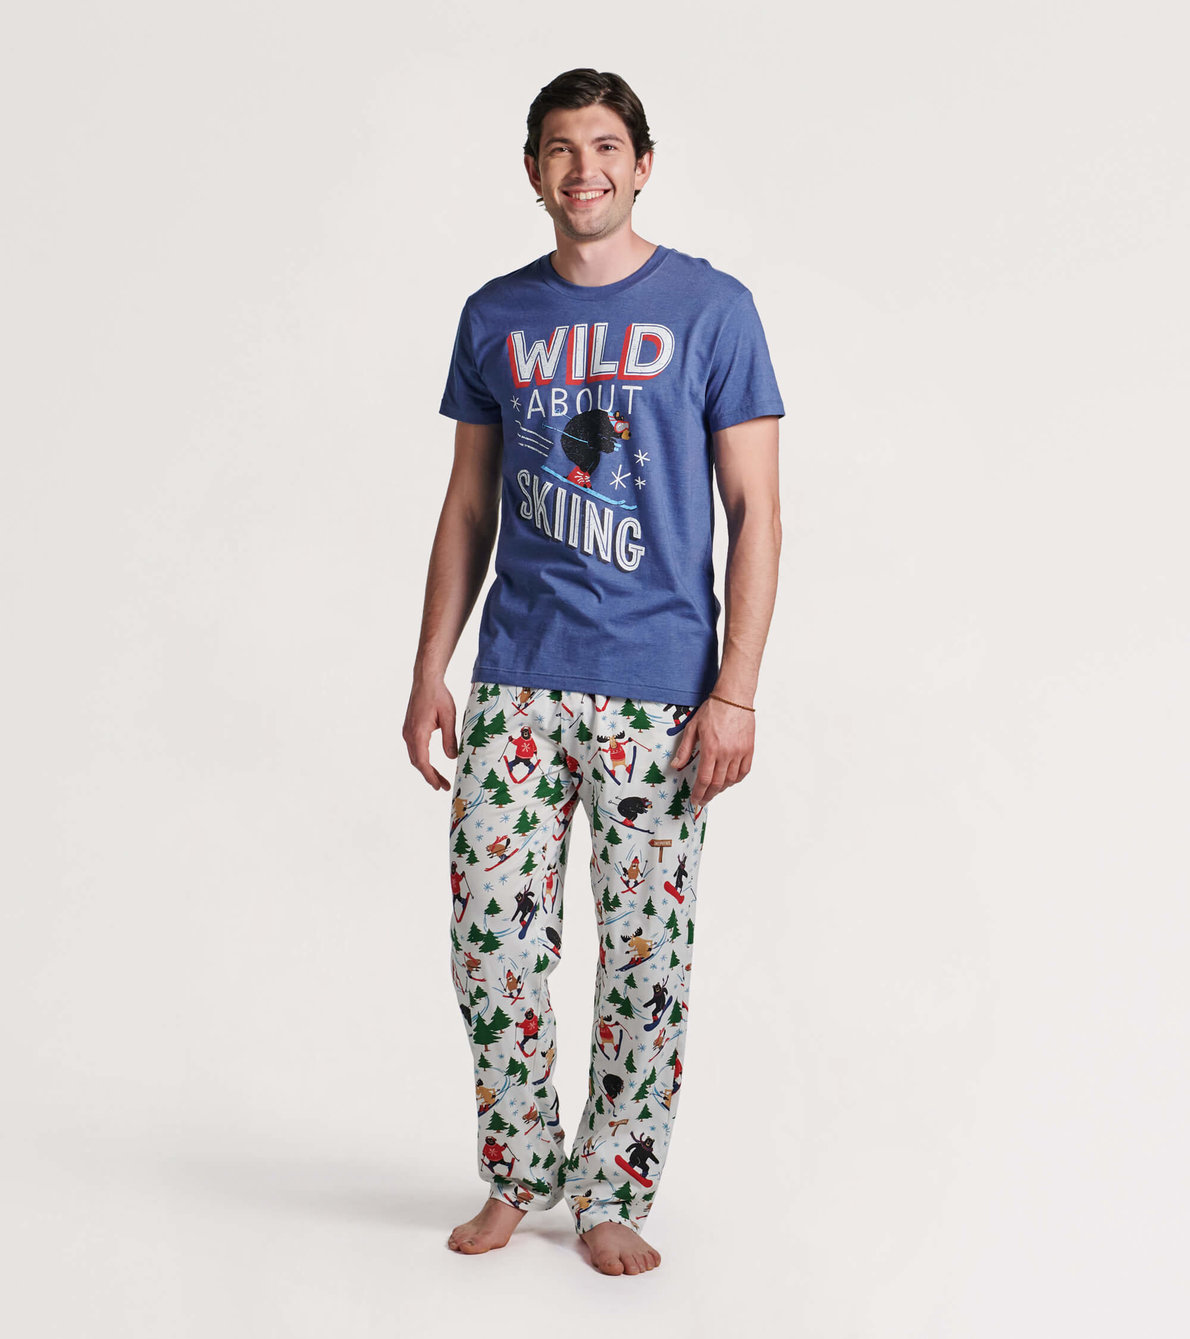 View larger image of Wild About Skiing Men's Tee and Pants Pajama Separates